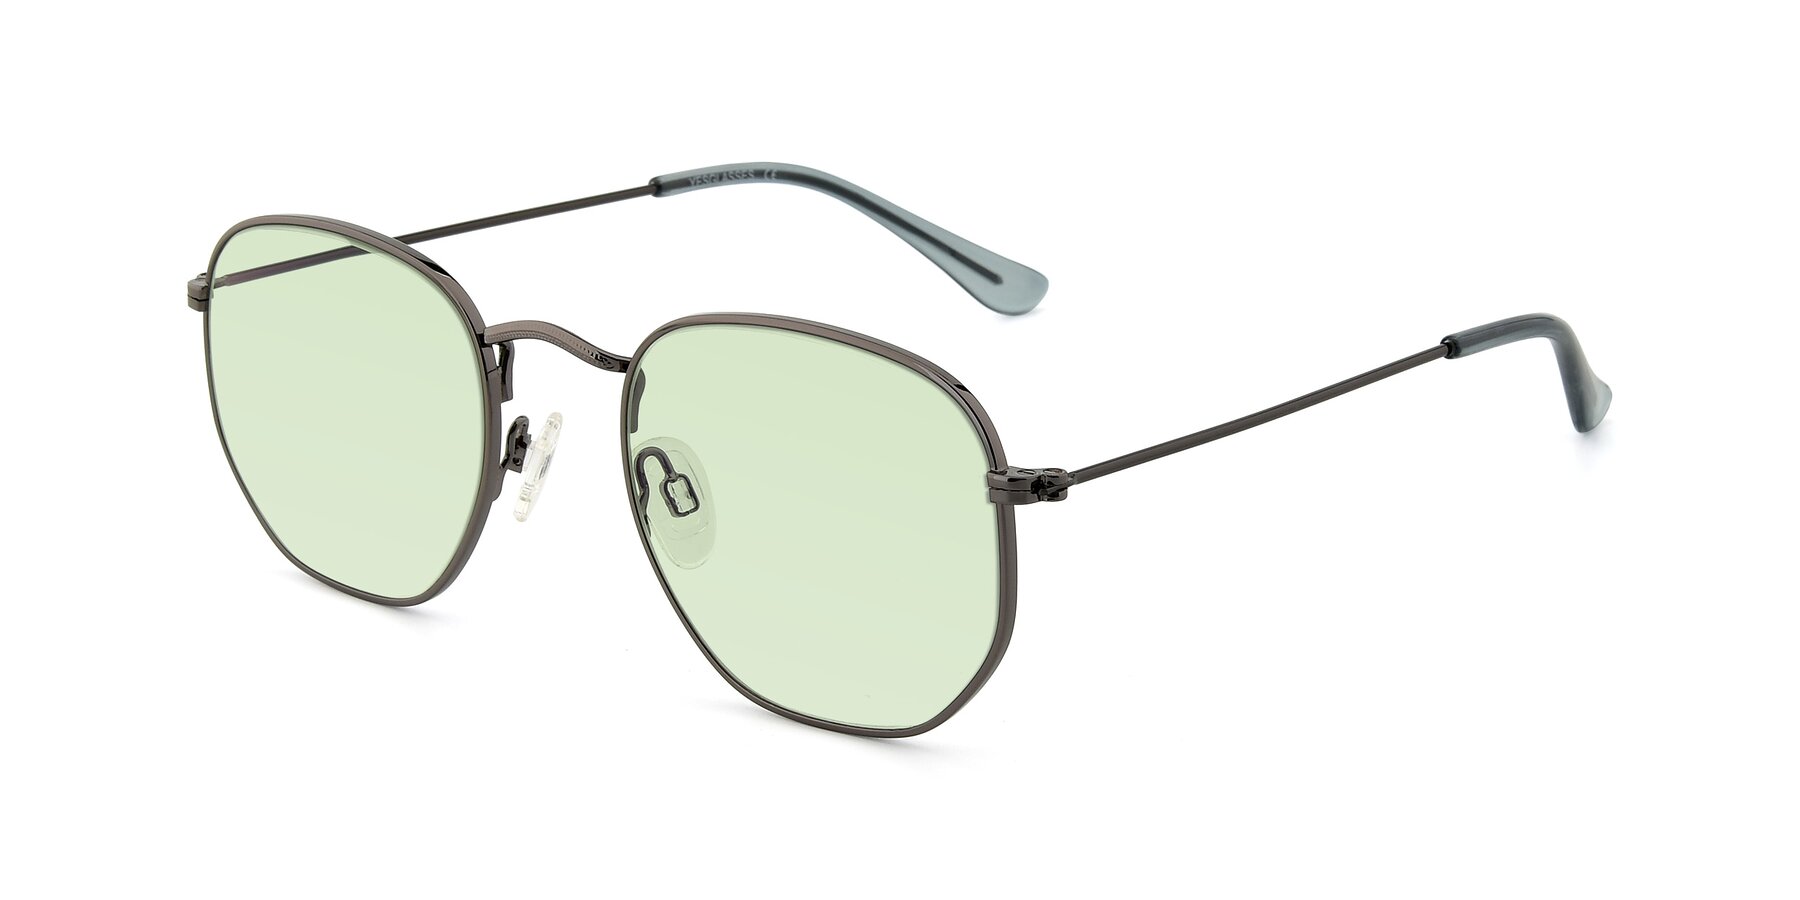 Angle of SSR1943 in Grey with Light Green Tinted Lenses